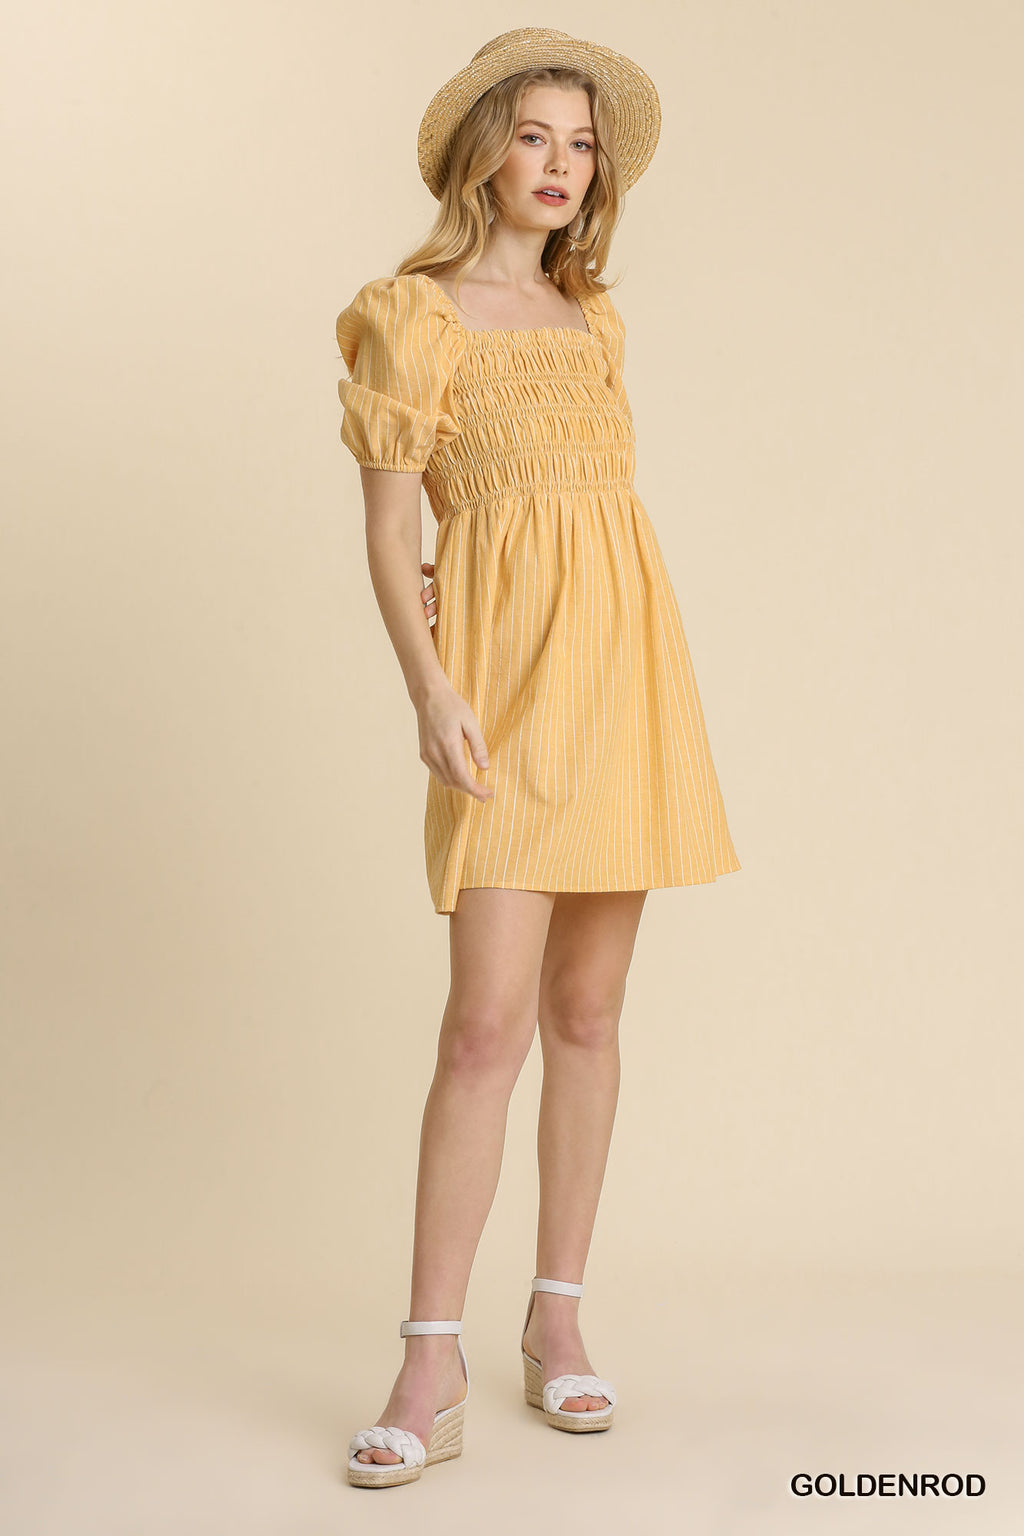 Goldenrod Striped Umgee Dress with Smocked Bodice and Puff Sleeves